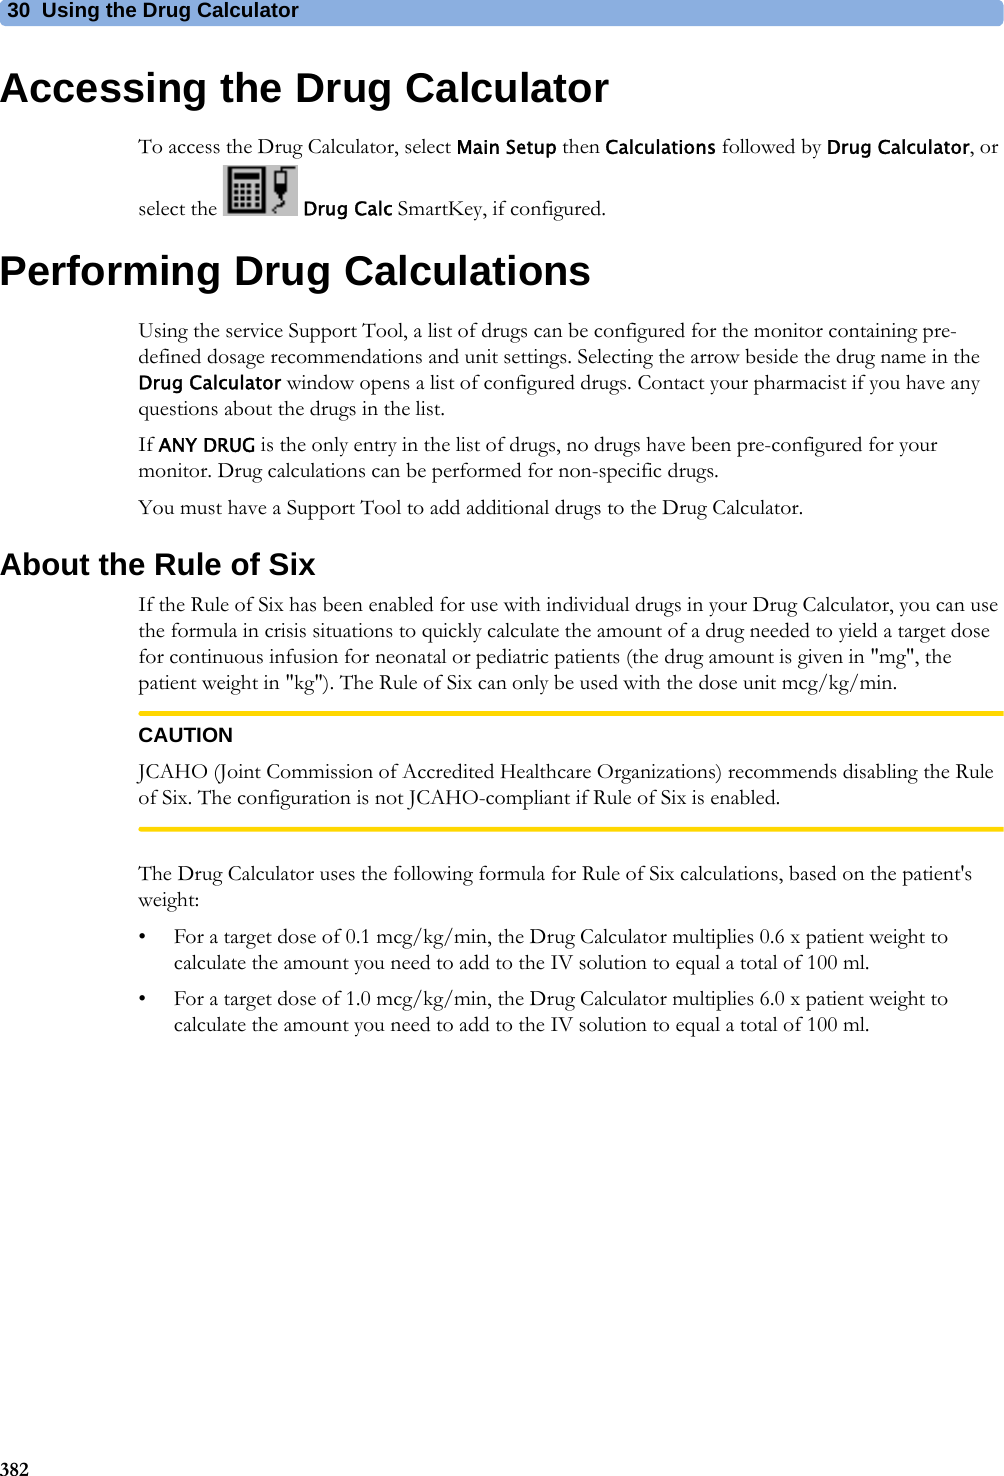 30 Using the Drug Calculator382Accessing the Drug CalculatorTo access the Drug Calculator, select Main Setup then Calculations followed by Drug Calculator, or select the  Drug Calc SmartKey, if configured.Performing Drug CalculationsUsing the service Support Tool, a list of drugs can be configured for the monitor containing pre-defined dosage recommendations and unit settings. Selecting the arrow beside the drug name in the Drug Calculator window opens a list of configured drugs. Contact your pharmacist if you have any questions about the drugs in the list.If ANY DRUG is the only entry in the list of drugs, no drugs have been pre-configured for your monitor. Drug calculations can be performed for non-specific drugs.You must have a Support Tool to add additional drugs to the Drug Calculator.About the Rule of SixIf the Rule of Six has been enabled for use with individual drugs in your Drug Calculator, you can use the formula in crisis situations to quickly calculate the amount of a drug needed to yield a target dose for continuous infusion for neonatal or pediatric patients (the drug amount is given in &quot;mg&quot;, the patient weight in &quot;kg&quot;). The Rule of Six can only be used with the dose unit mcg/kg/min.CAUTIONJCAHO (Joint Commission of Accredited Healthcare Organizations) recommends disabling the Rule of Six. The configuration is not JCAHO-compliant if Rule of Six is enabled.The Drug Calculator uses the following formula for Rule of Six calculations, based on the patient&apos;s weight:• For a target dose of 0.1 mcg/kg/min, the Drug Calculator multiplies 0.6 x patient weight to calculate the amount you need to add to the IV solution to equal a total of 100 ml.• For a target dose of 1.0 mcg/kg/min, the Drug Calculator multiplies 6.0 x patient weight to calculate the amount you need to add to the IV solution to equal a total of 100 ml.